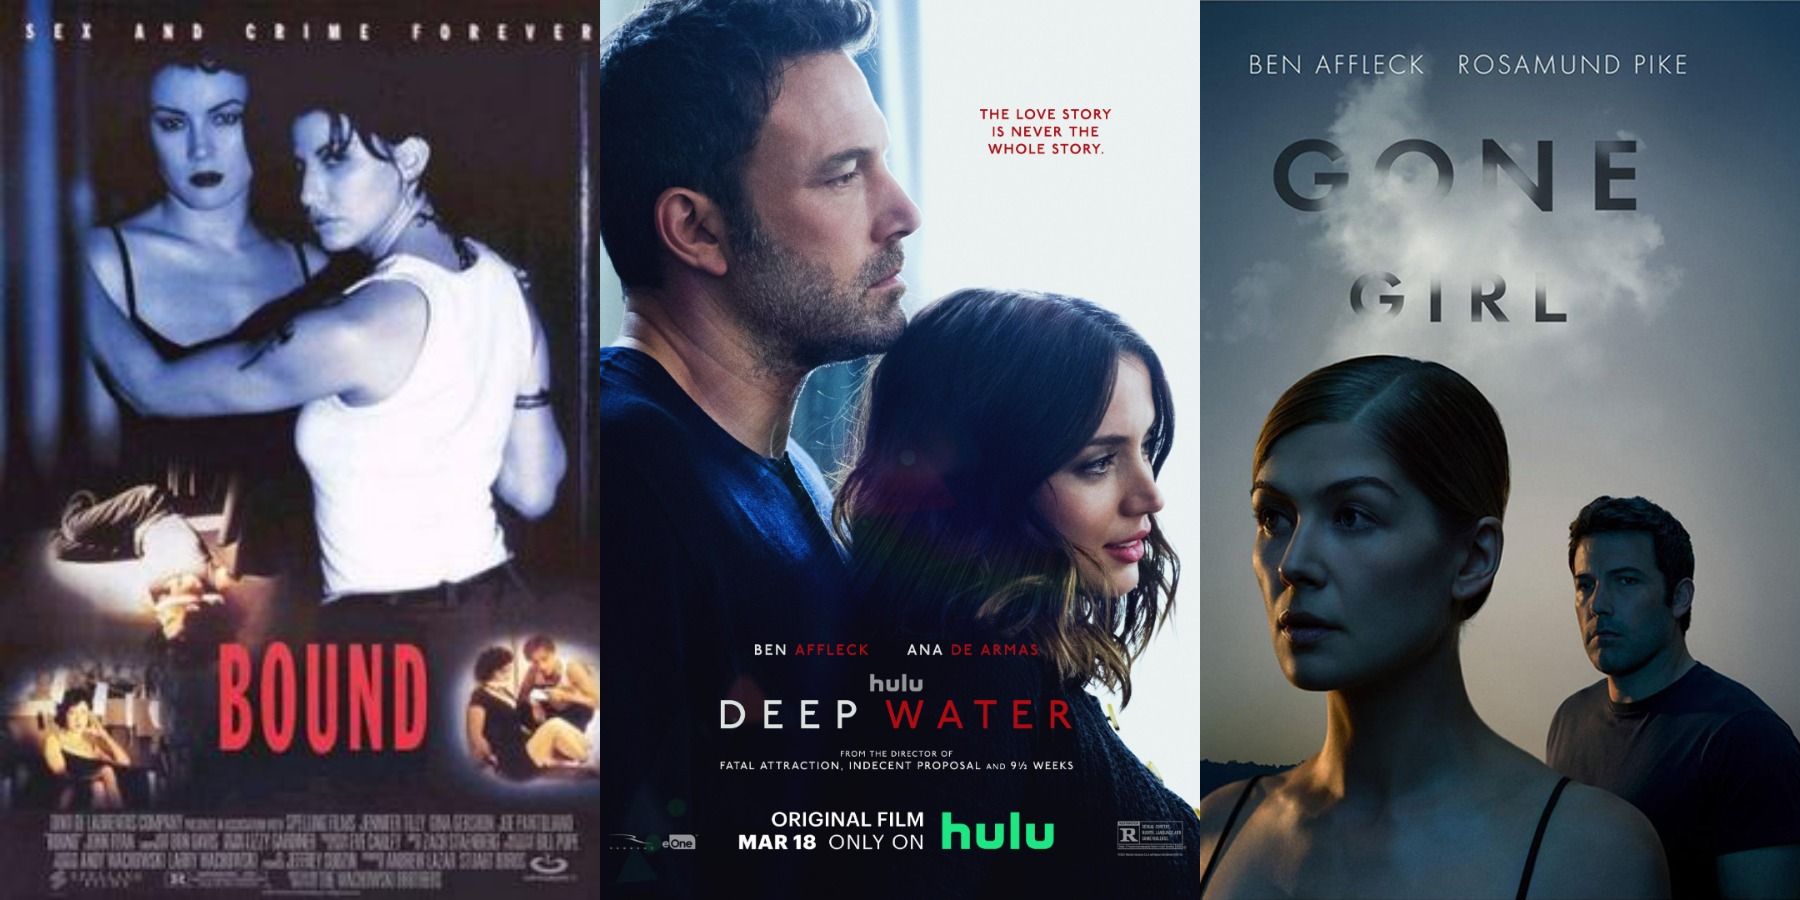 Deep Water Poster with the posters for Bound and Gone Girl